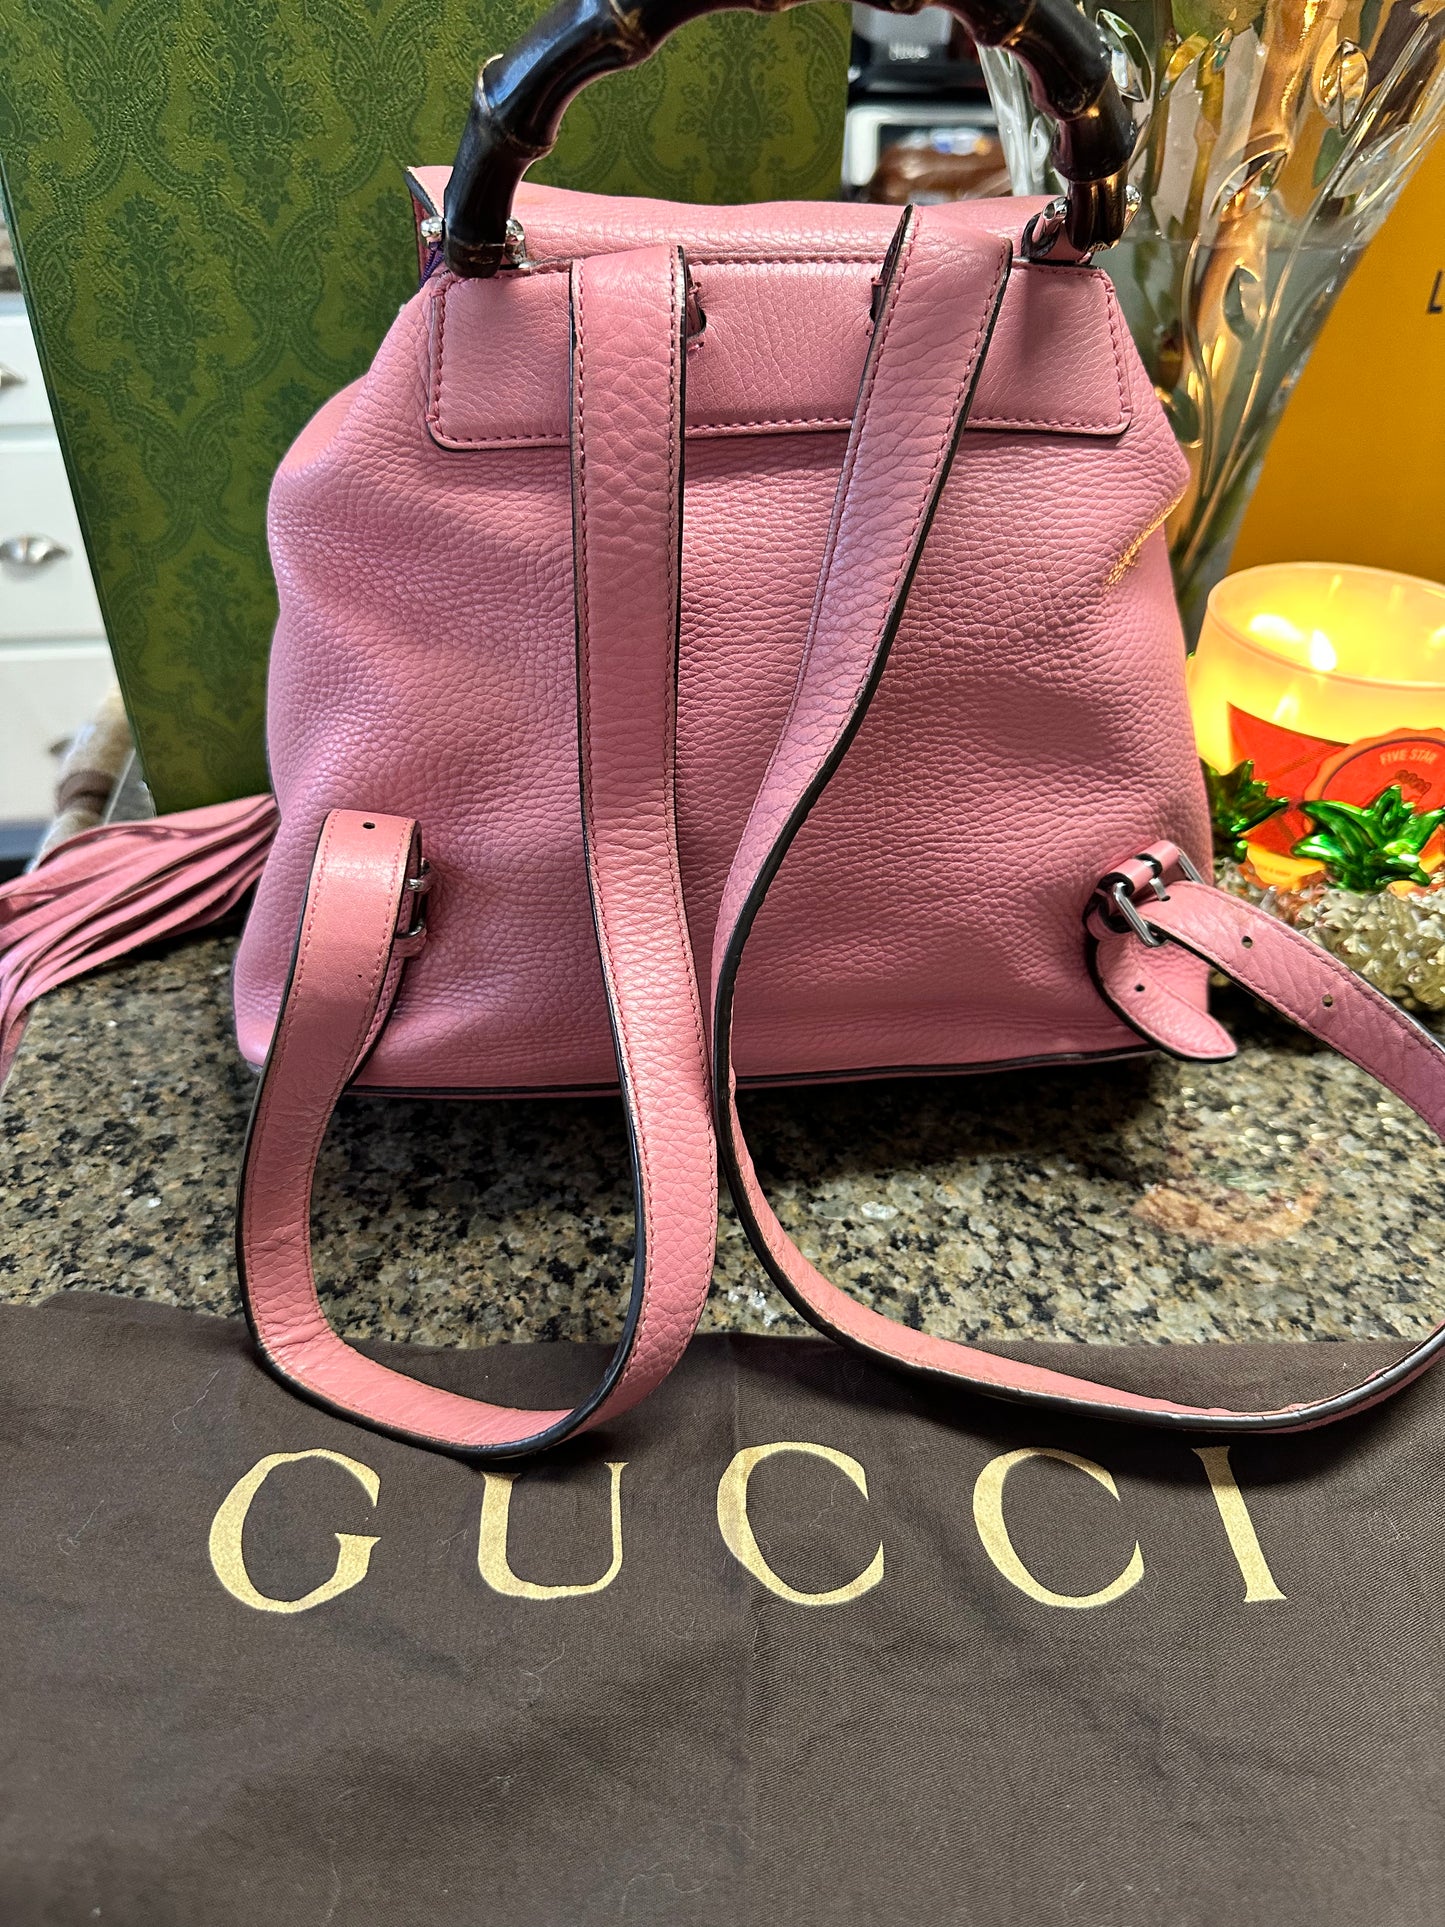 AUTHENTIC Preloved Gucci bamboo backpack